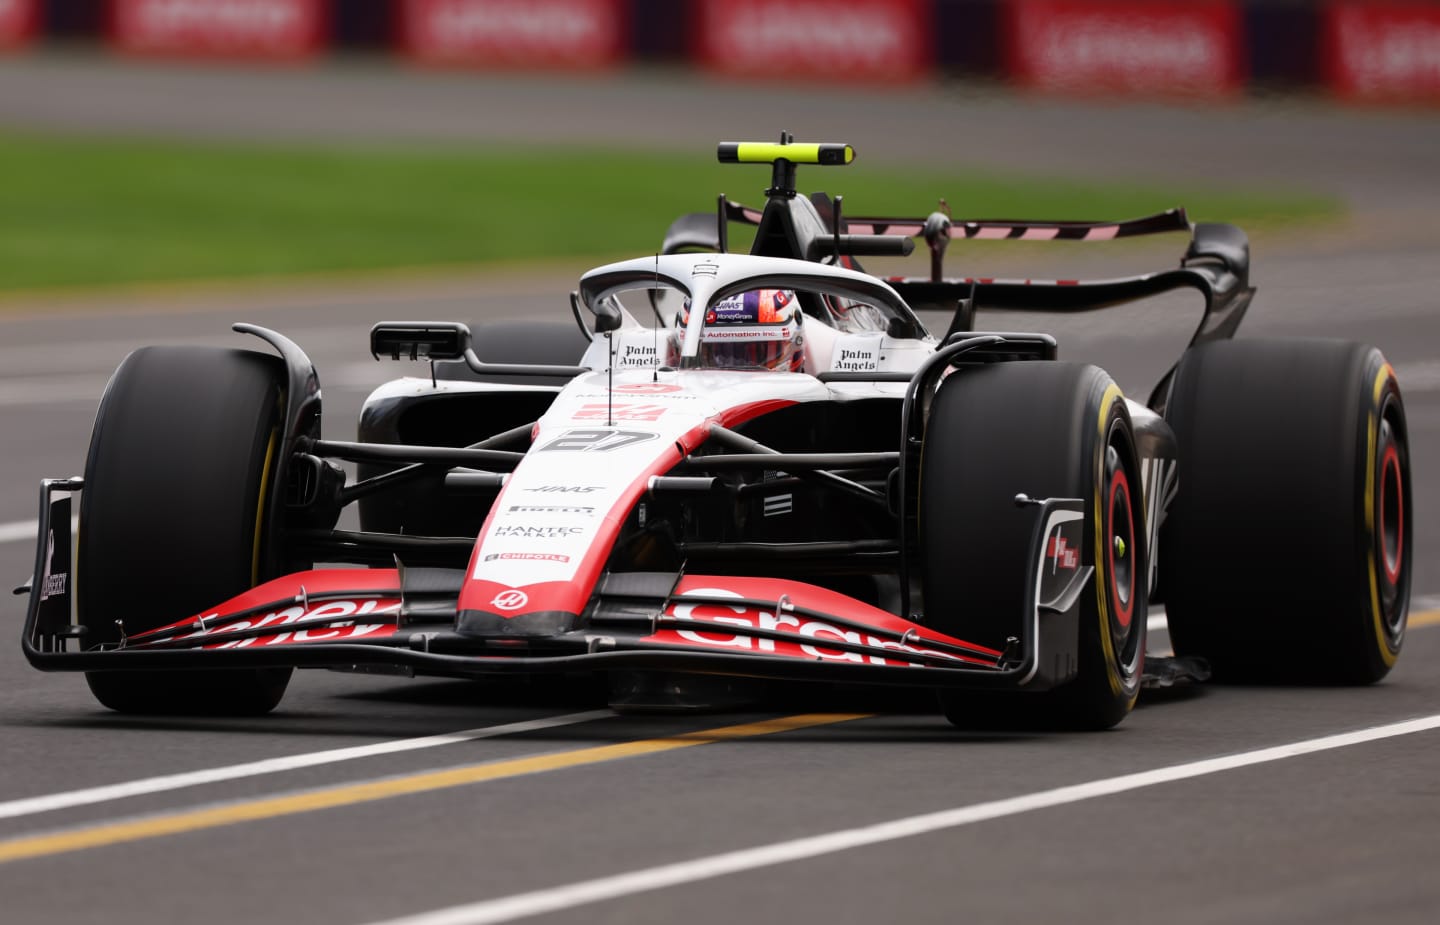 MELBOURNE, AUSTRALIA - APRIL 01: Nico Hulkenberg of Germany driving the (27) Haas F1 VF-23 Ferrari on track during final practice ahead of the F1 Grand Prix of Australia at Albert Park Grand Prix Circuit on April 01, 2023 in Melbourne, Australia. (Photo by Robert Cianflone/Getty Images)